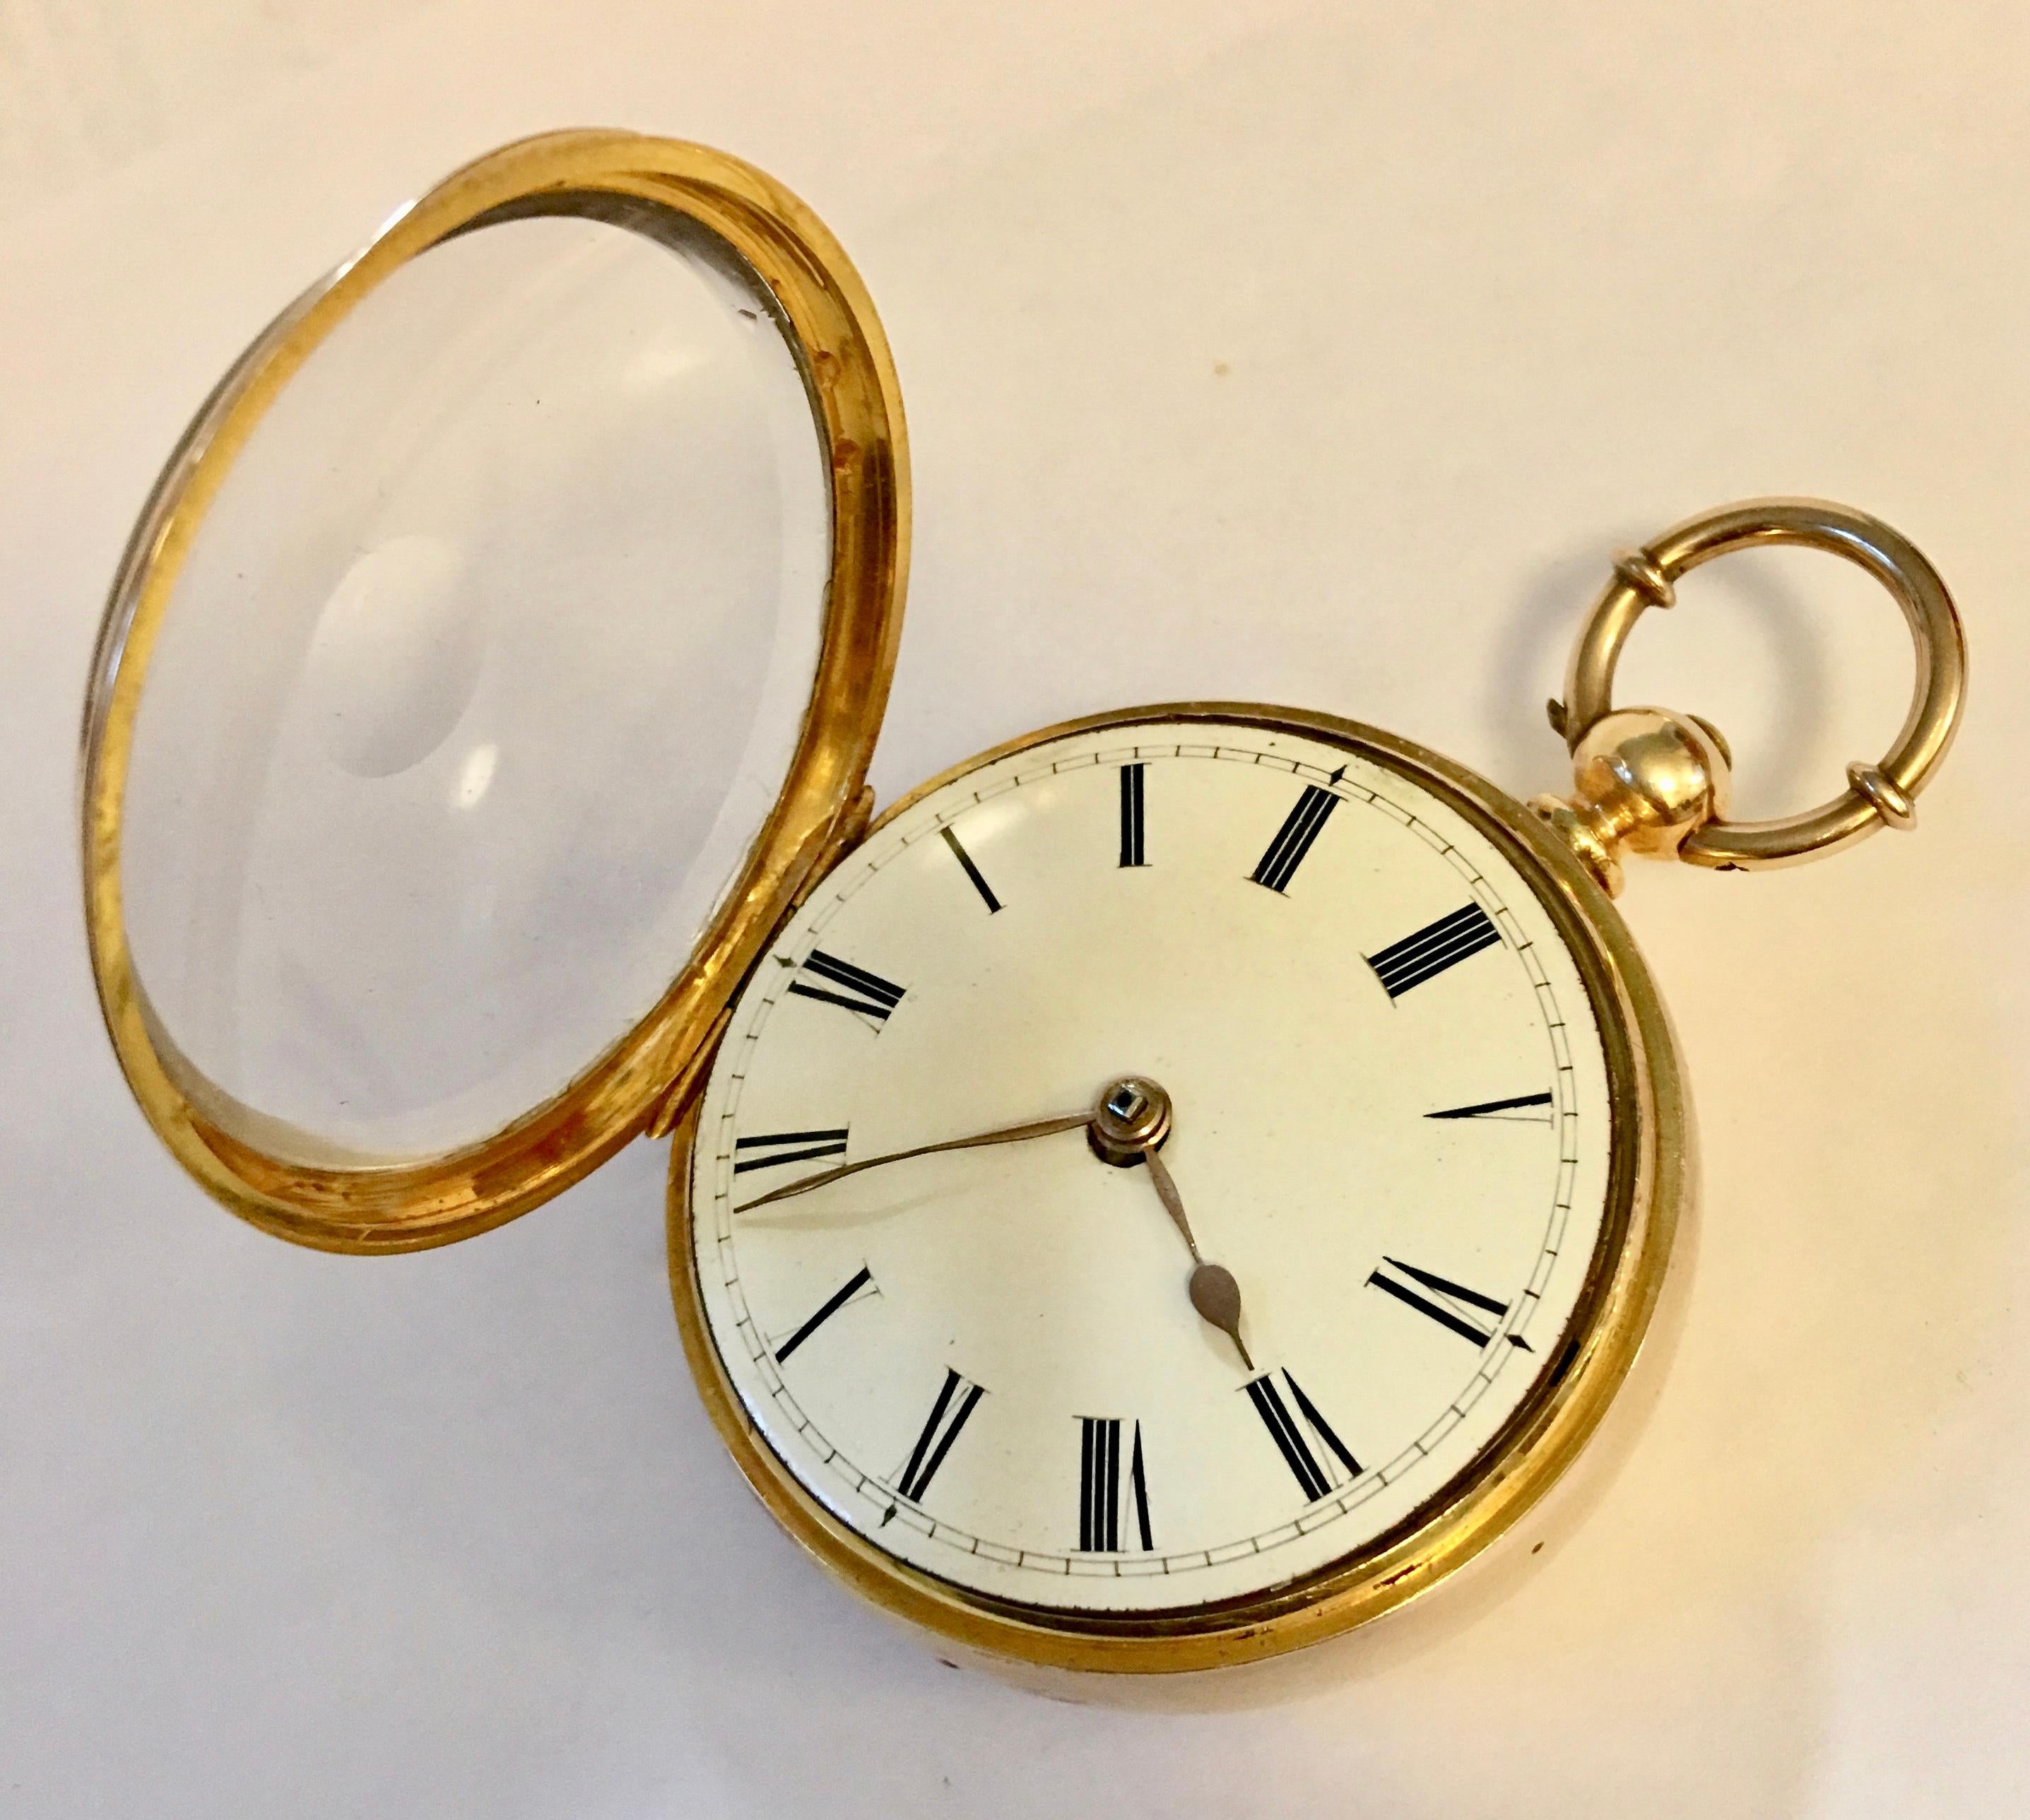 A superb quality 14-karat gold musical repeater pocket watch. In excellent working conditions with all original parts. A clean white enamel face with Roman numerals, gold arrowed hands. The watch sits within the gold open faced case with a hinge